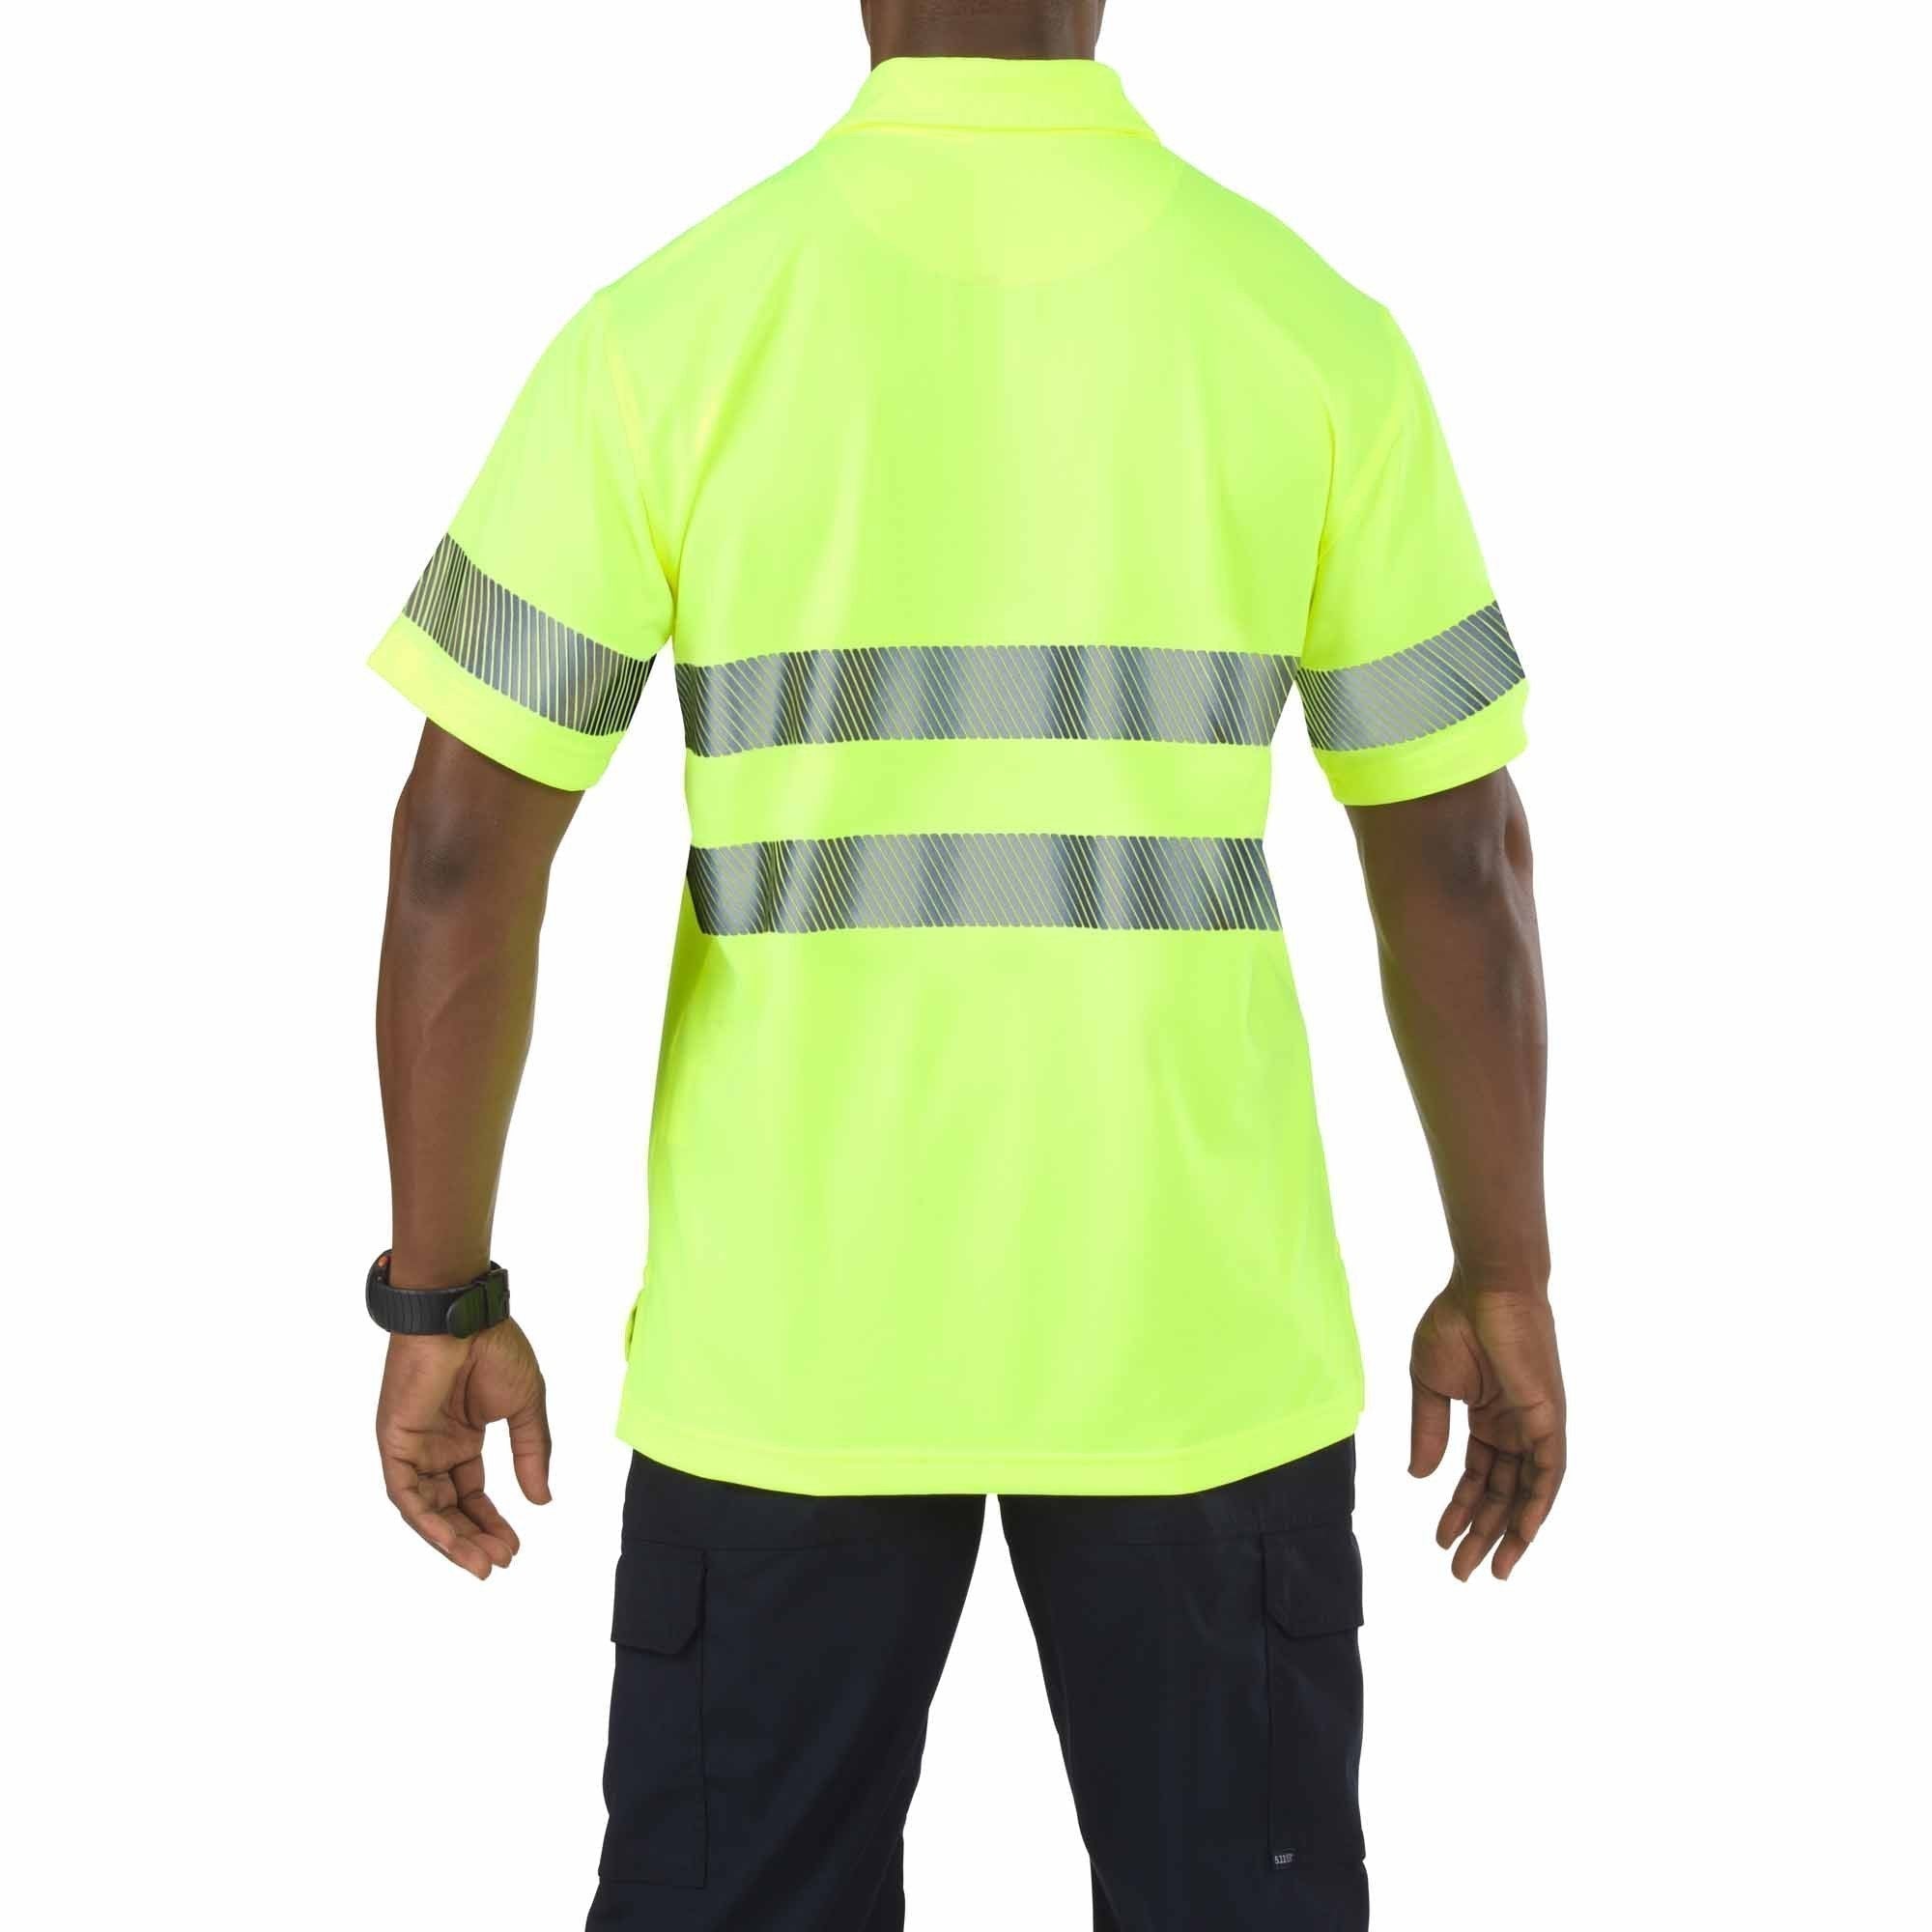 5.11 Tactical High-Visibility Yellow Short Sleeve Polo Shirts 5.11 Tactical Tactical Gear Supplier Tactical Distributors Australia